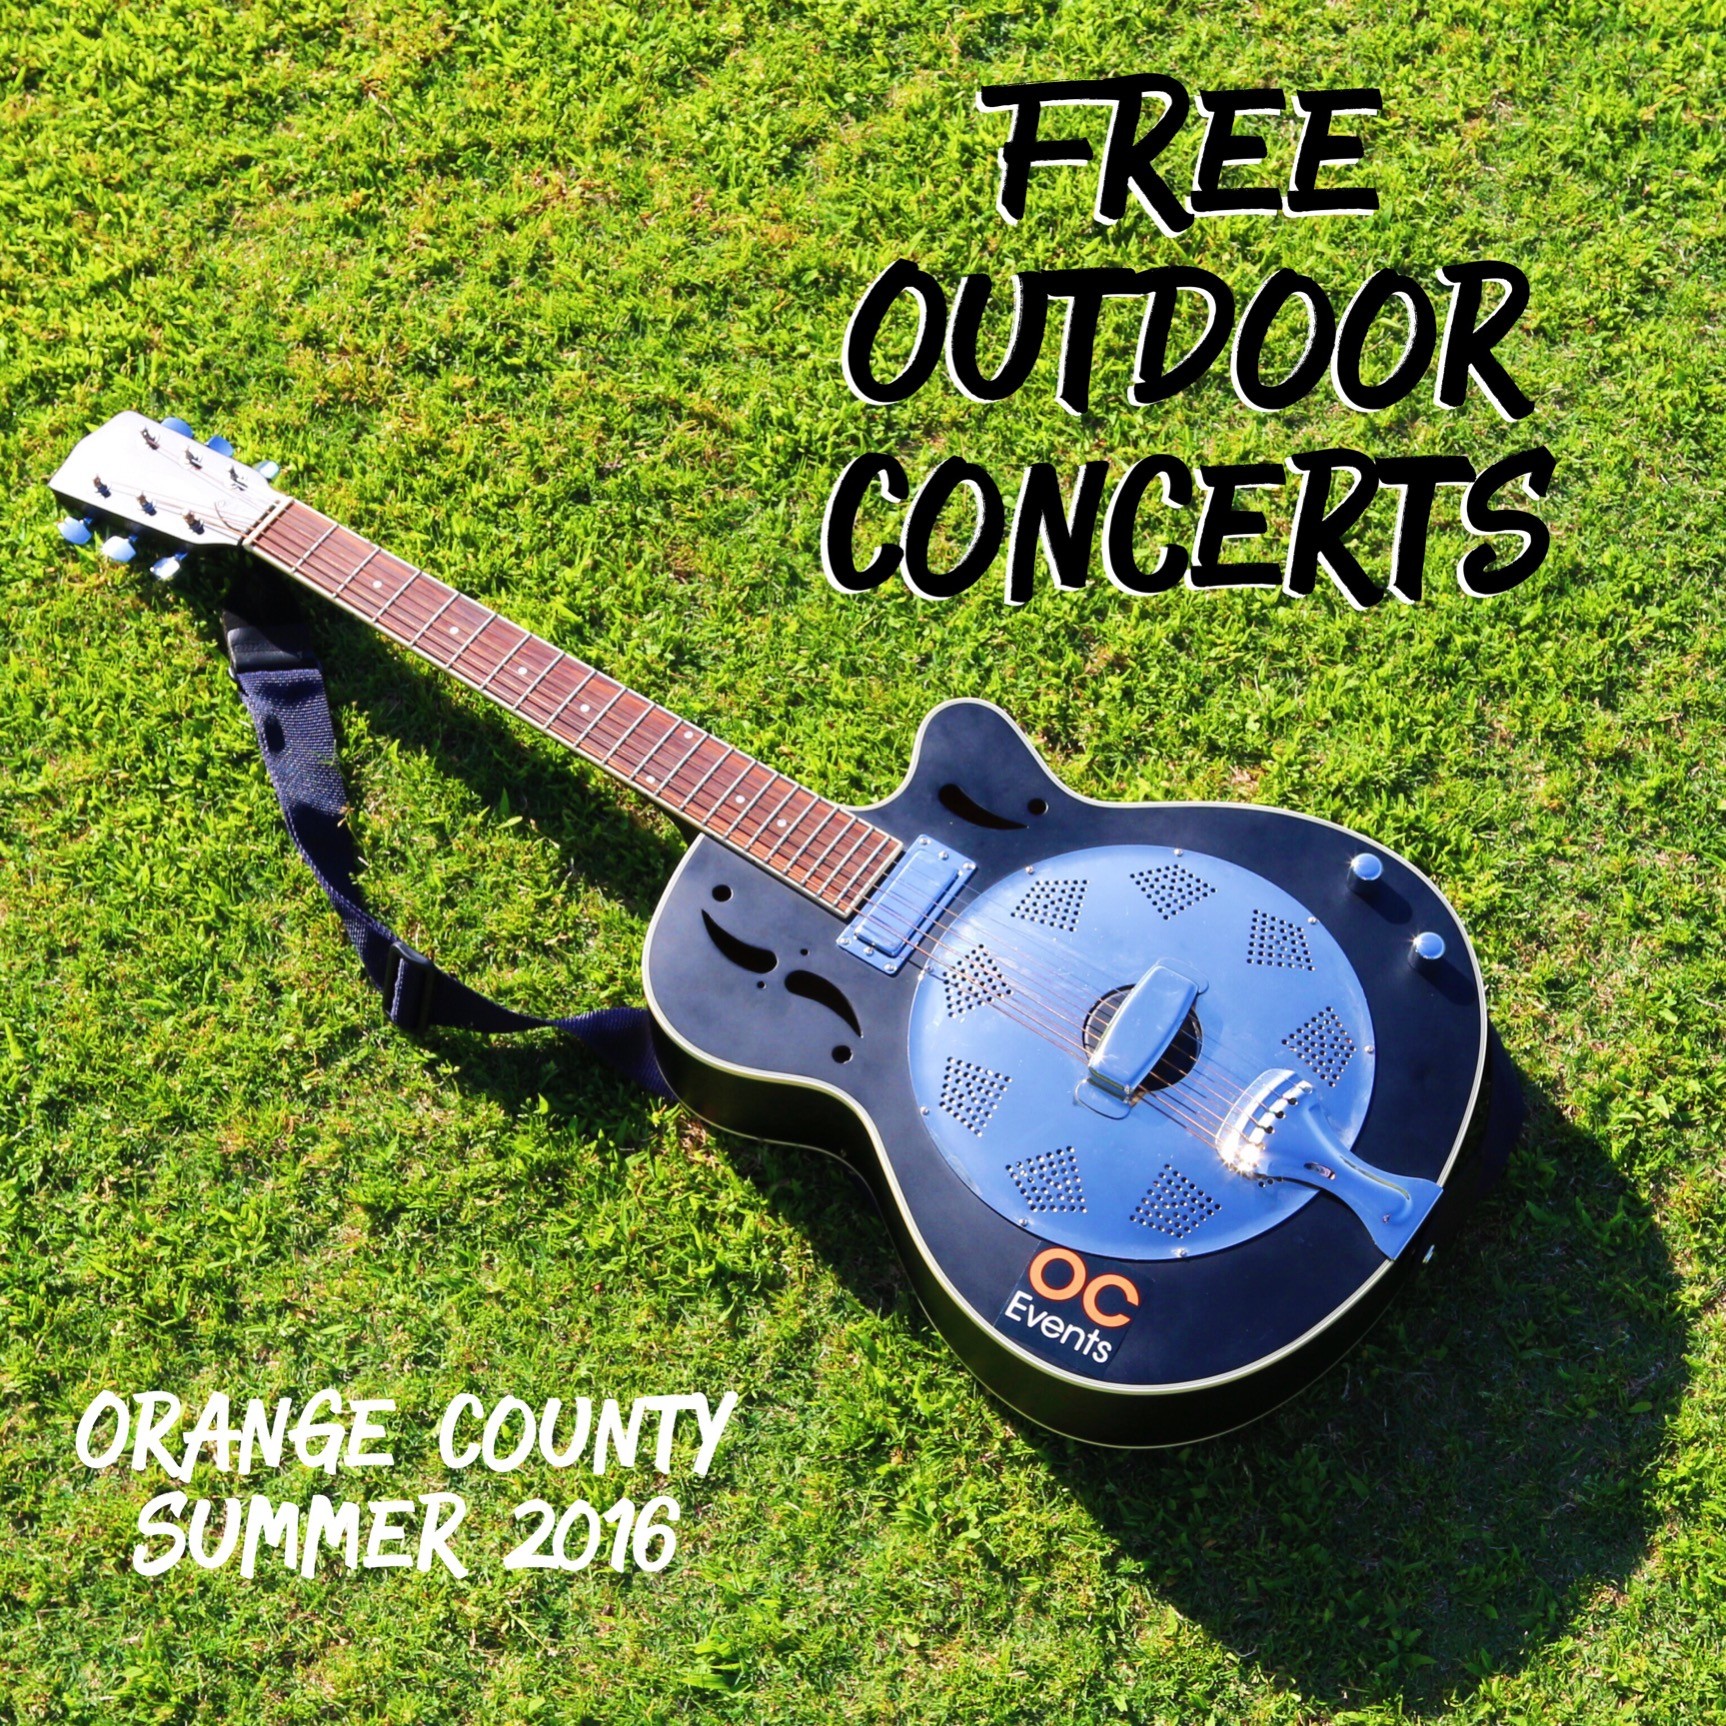 Nearly 200 Free Outdoor Concerts in Orange County Summer 2016 Things